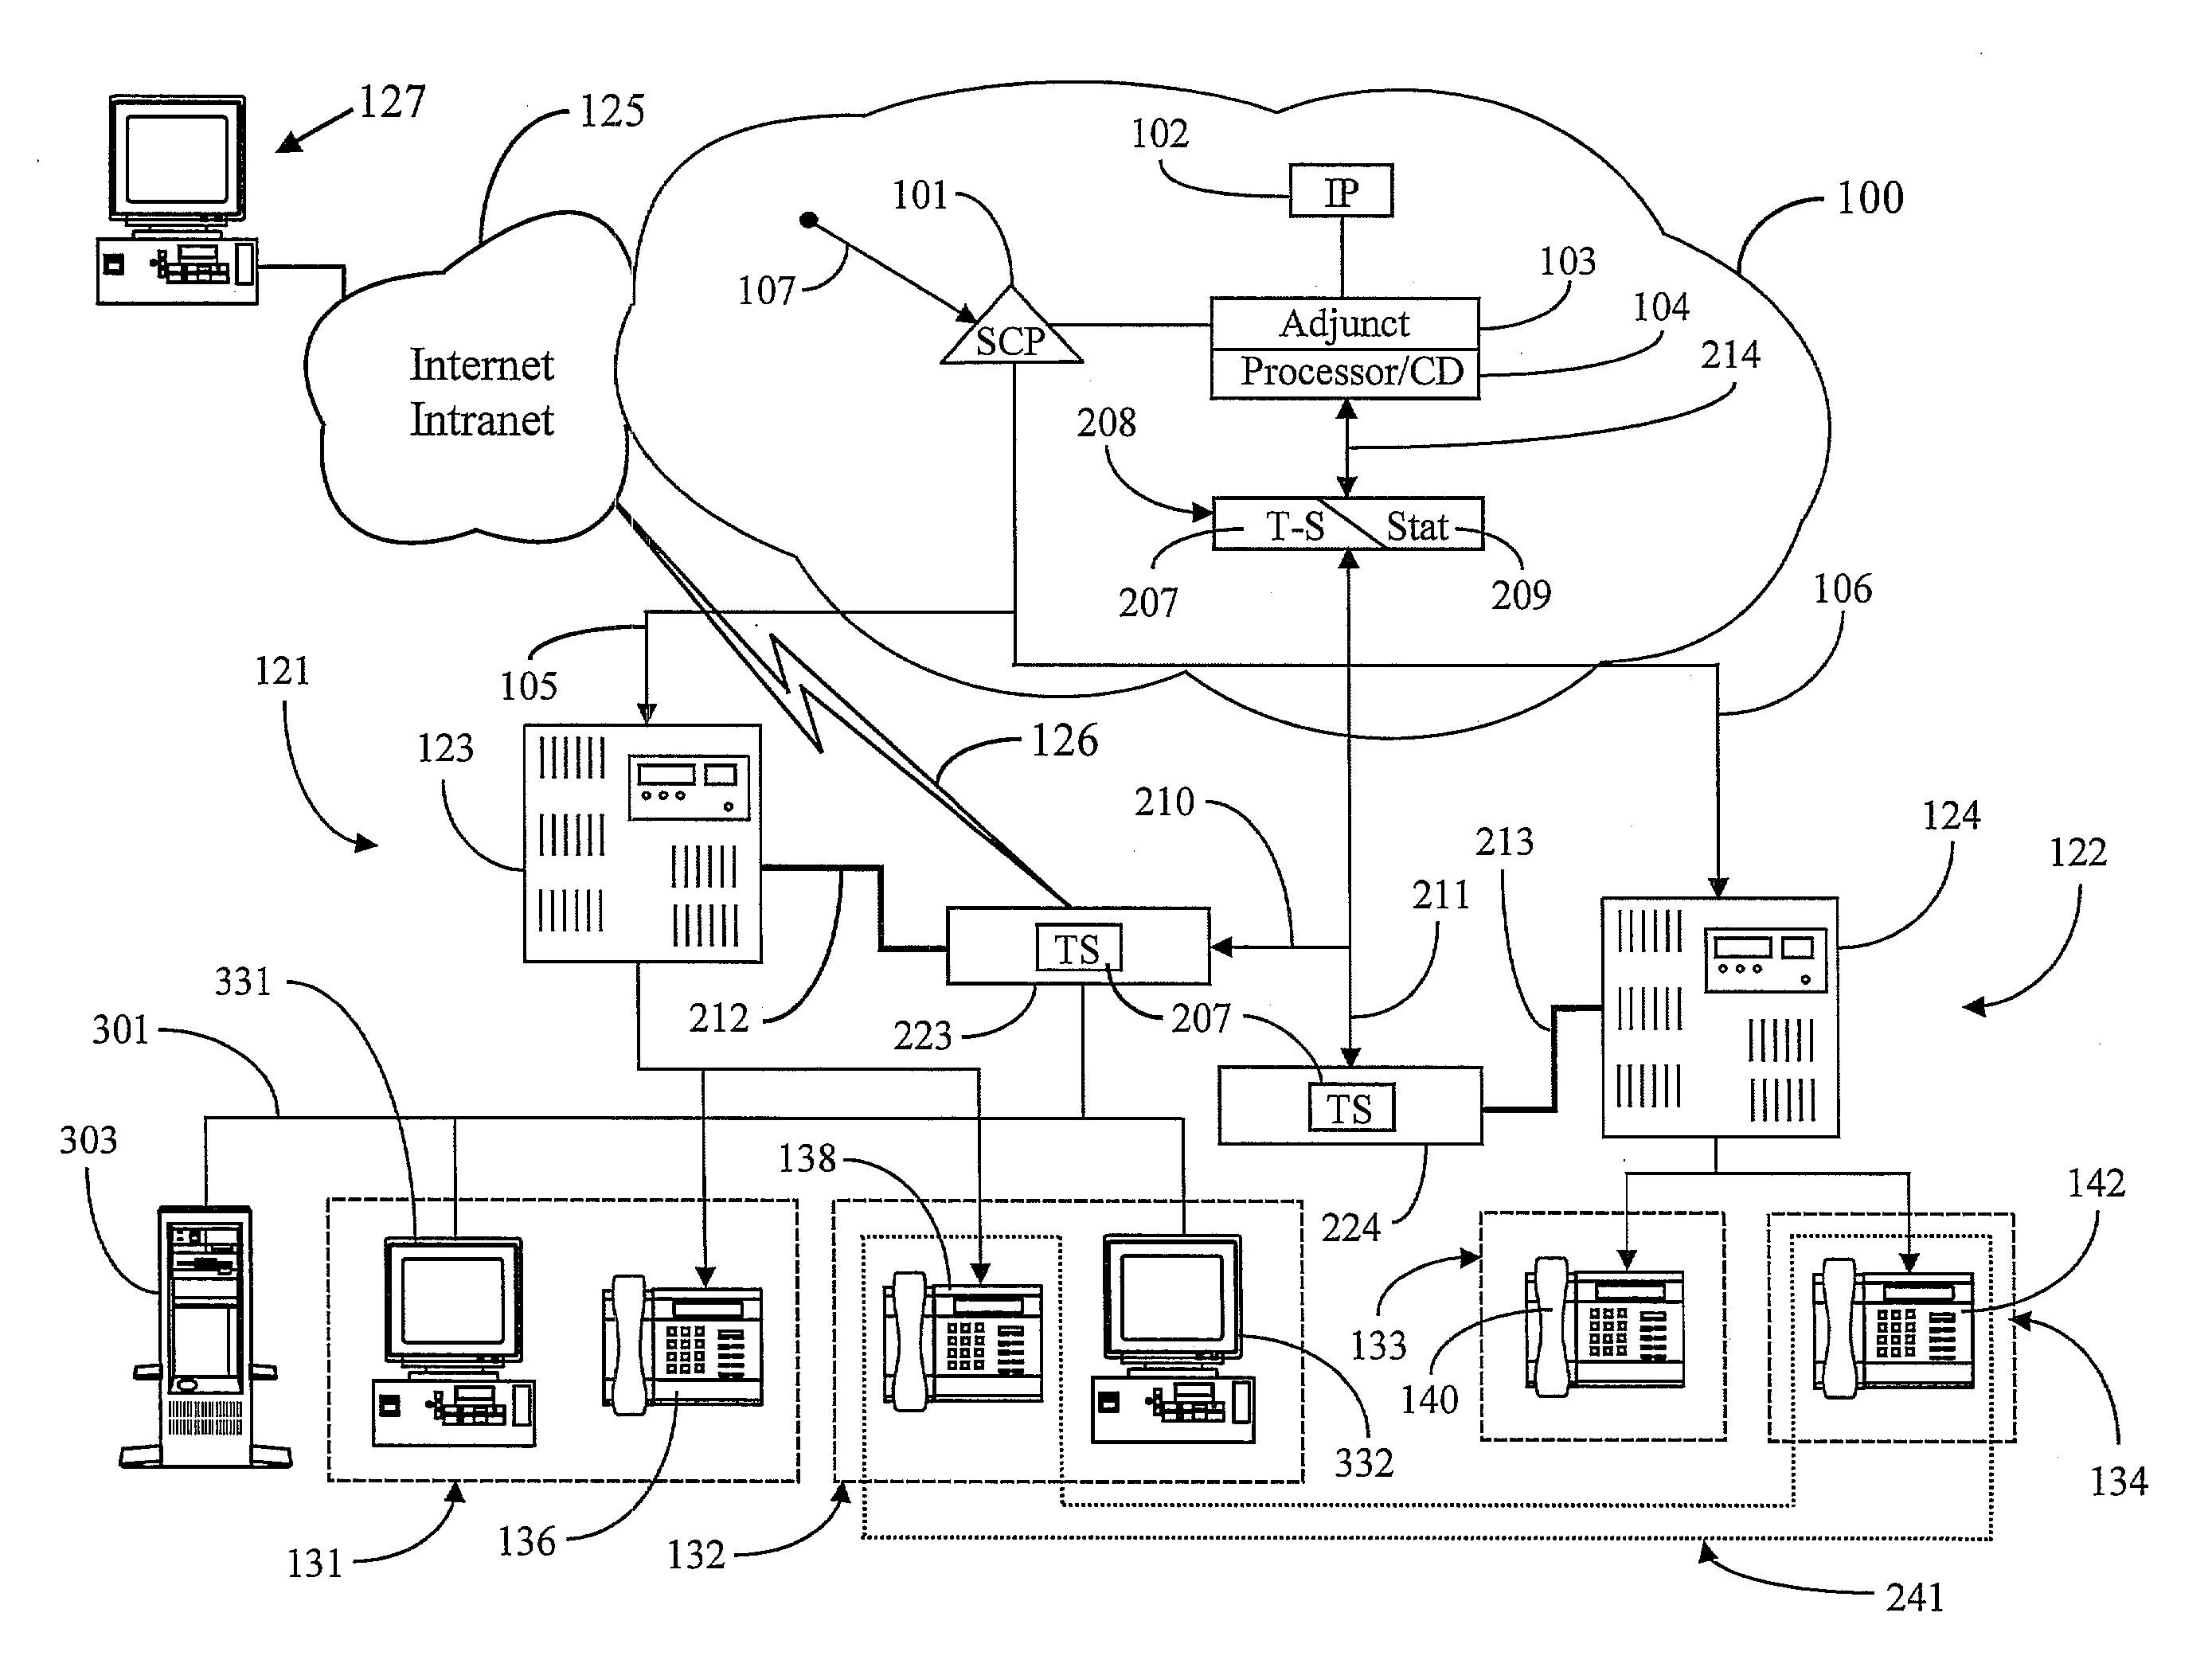 Apparatus and Methods for Coordinating Telephone and Data Communications